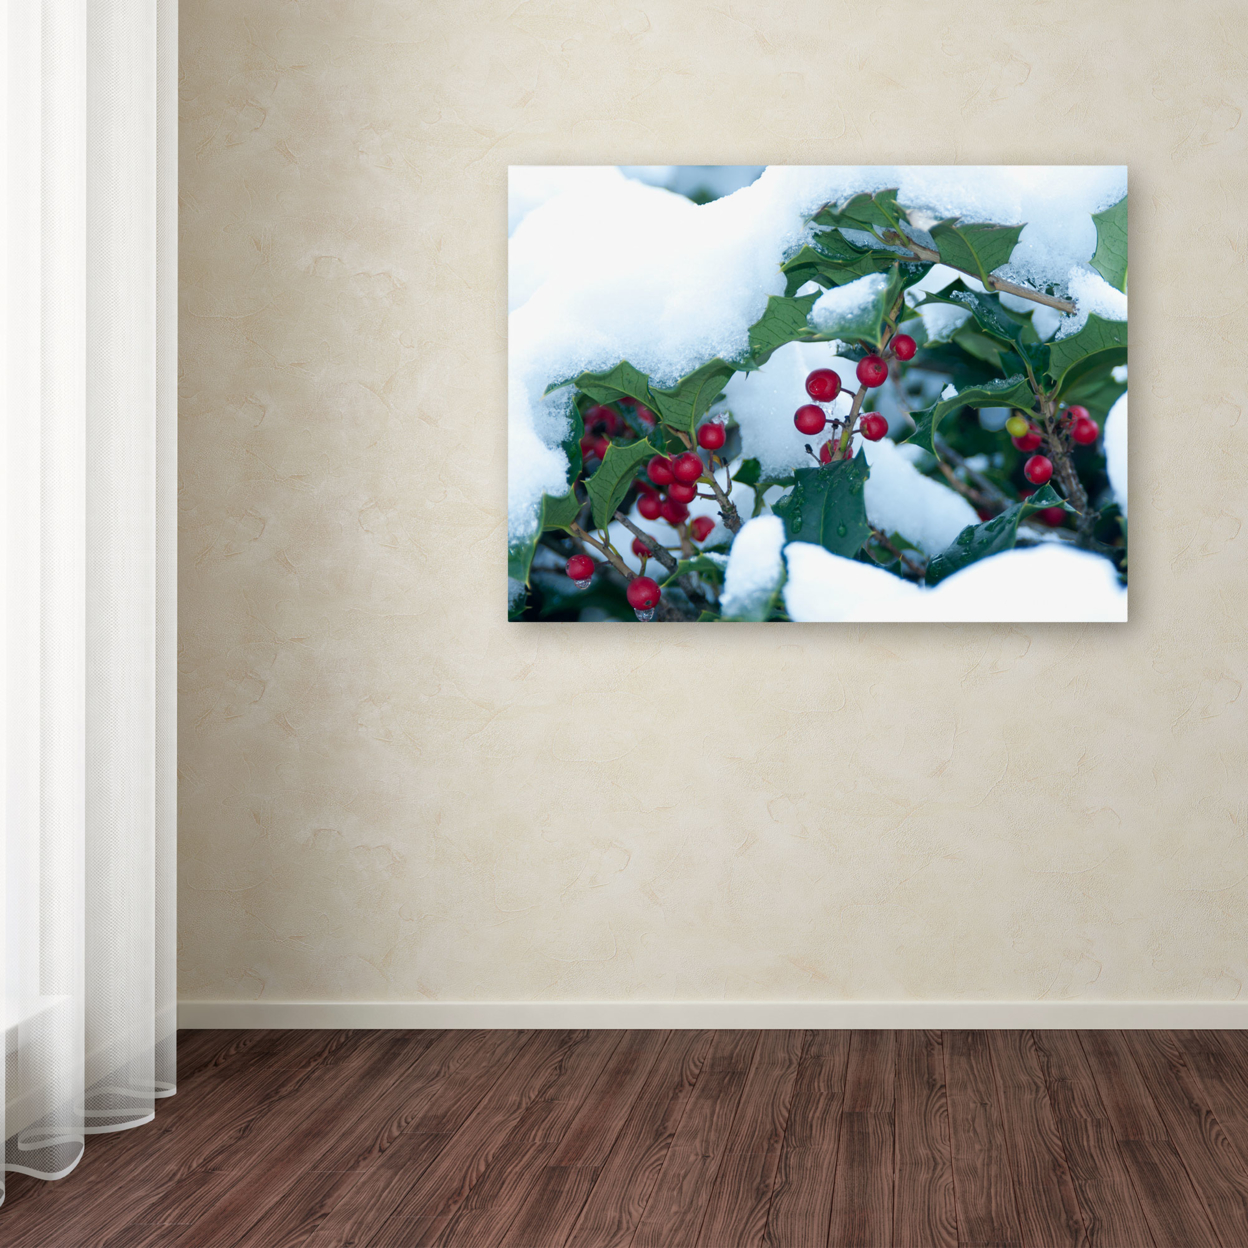 Kurt Shaffer 'Holly In The Snow' Canvas Wall Art 35 X 47 Inches